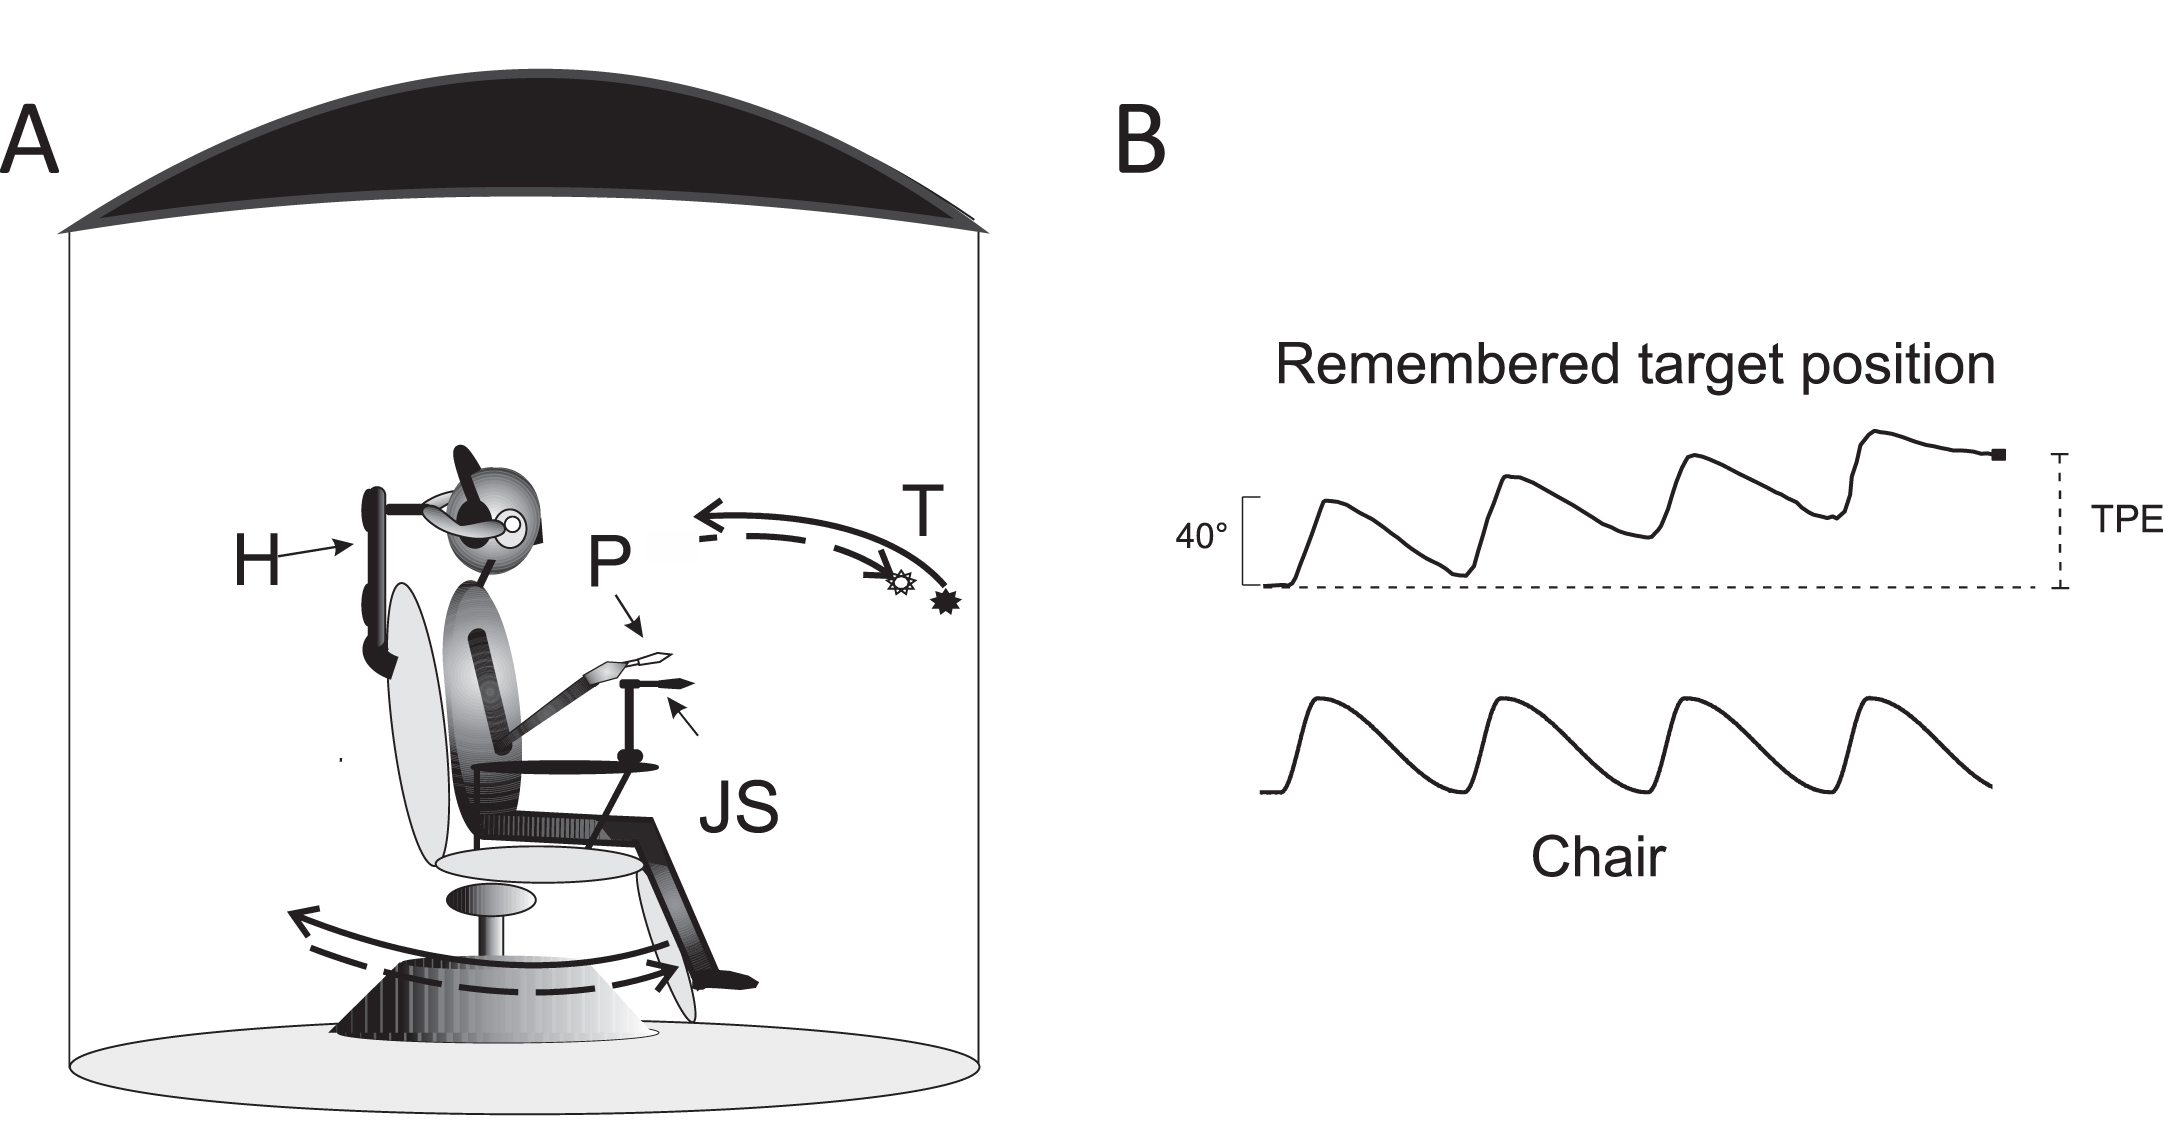 Experimental setting and motion perception recording. A: Schematic drawing of the experimental setting. Acoustically isolated cabin and rotating chair: P: pointer, T: visual target, presented just before rotation in the dark, H: head holder. The solid arrows indicate the chair asymmetric rotation (solid arrow: fast rotation; dashed arrow: slow rotation). The representation of the memorized visual target at the end of four cycles of asymmetric rotation is shifted (dashed arrow) in the opposite direction to the fast rotation. B: Motion perception tracking in response to four cycles of asymmetric rotation. Upper trace: Tracking of the memorized visual target during rotation revealed by the pointer. The filled circle indicates the target position representation at the end of rotation. Lower trace: chair asymmetric rotation. Note the error (TPE) induced by asymmetric stimulation with respect to the real position of the target (vertical dashed line).